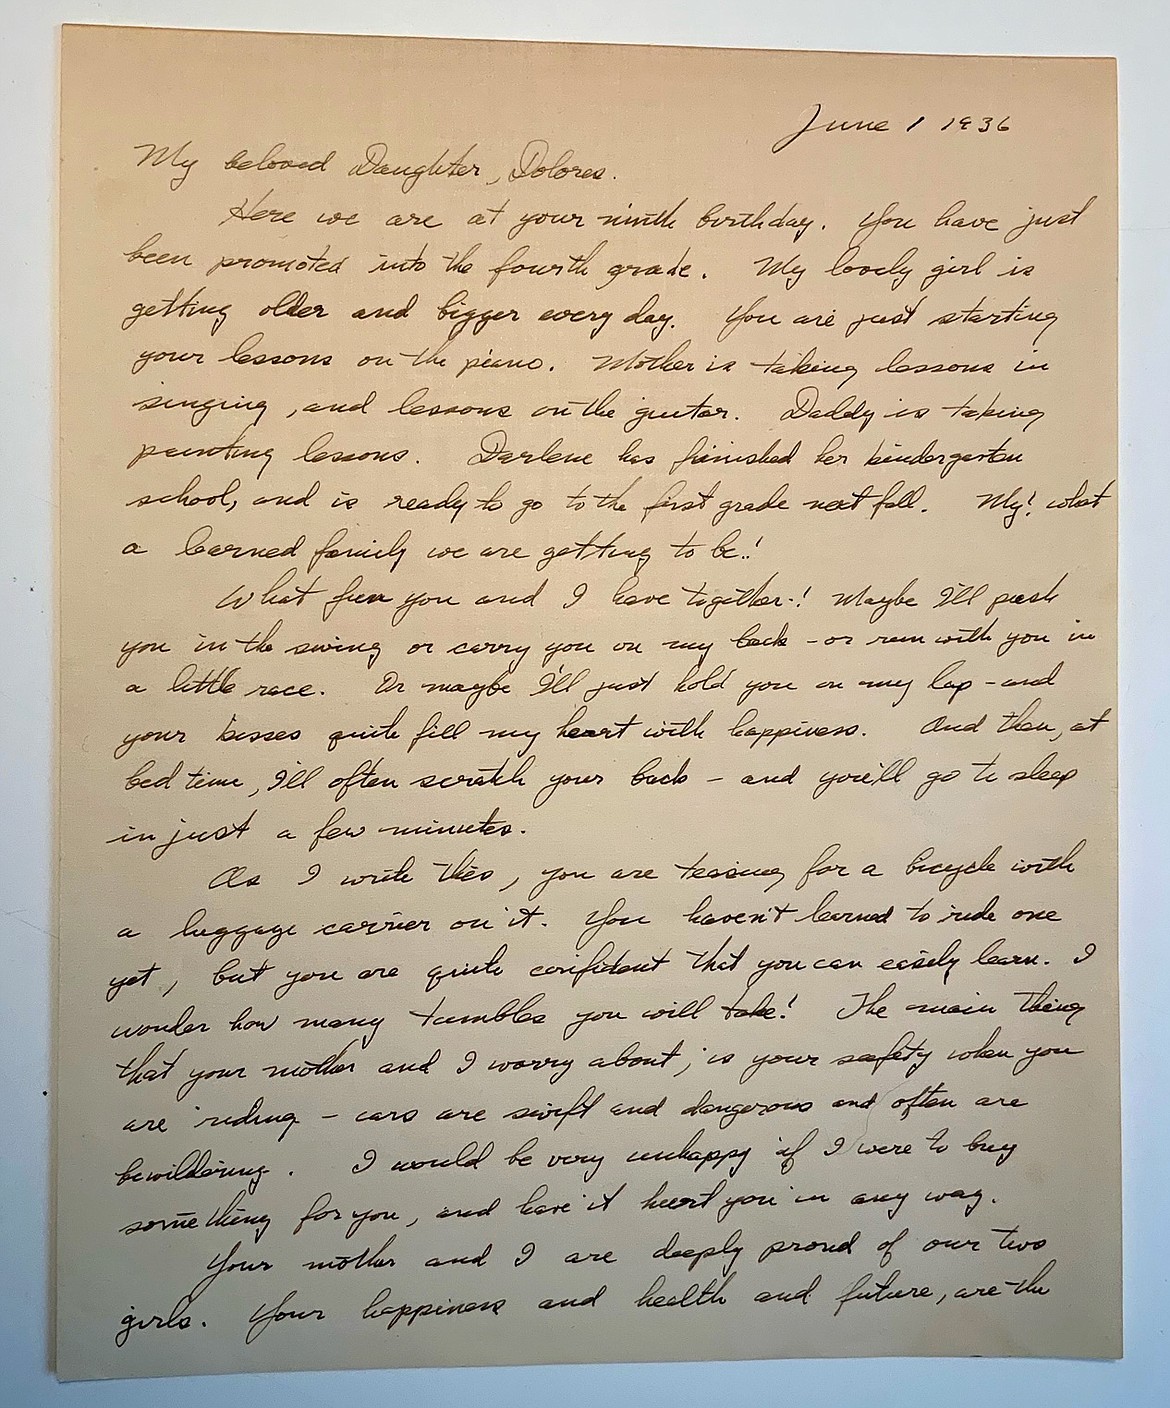 In this 1936 letter, a father shares messages of love for his daughter Dolores to treasure when she grows up. The letter was found sealed in the back of a painting that was in a Coeur d'Alene antique mall 30 years ago. The collector who found it now wants to return the letter and painting to the family.